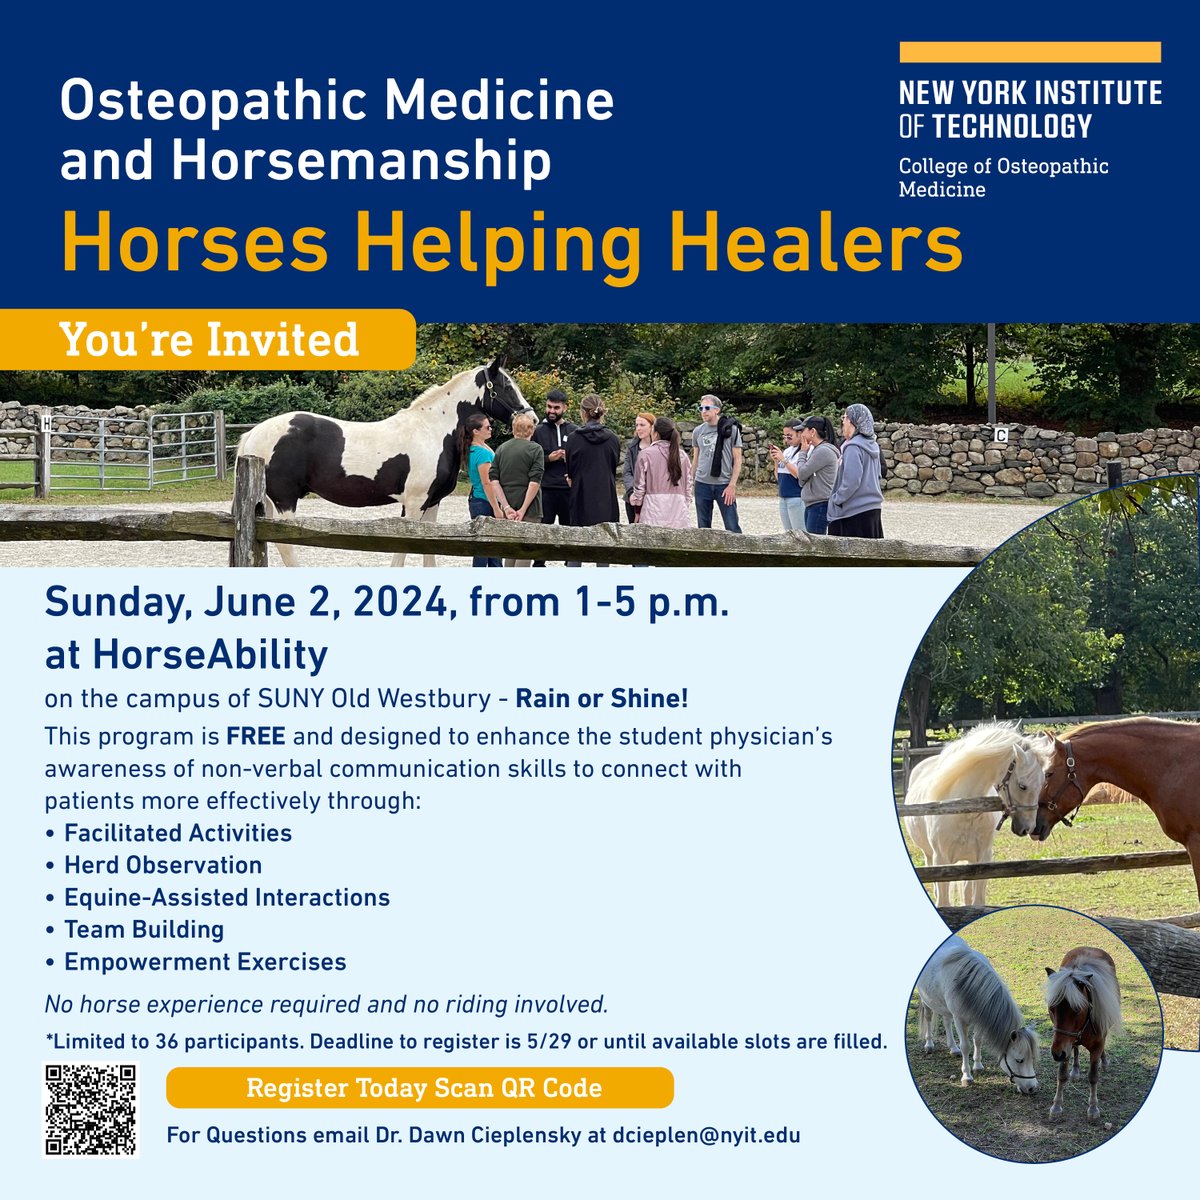 You’re invited to Osteopathic Medicine and Horsemanship Horses Helping Healers a half-day program at HorseAbility on Sunday, June 2 from 1-5 p.m., on the campus of SUNY Old Westbury. Click on link to register. nyit.edu/u/XwTVV3 Questions email dcieplen@nyit.edu